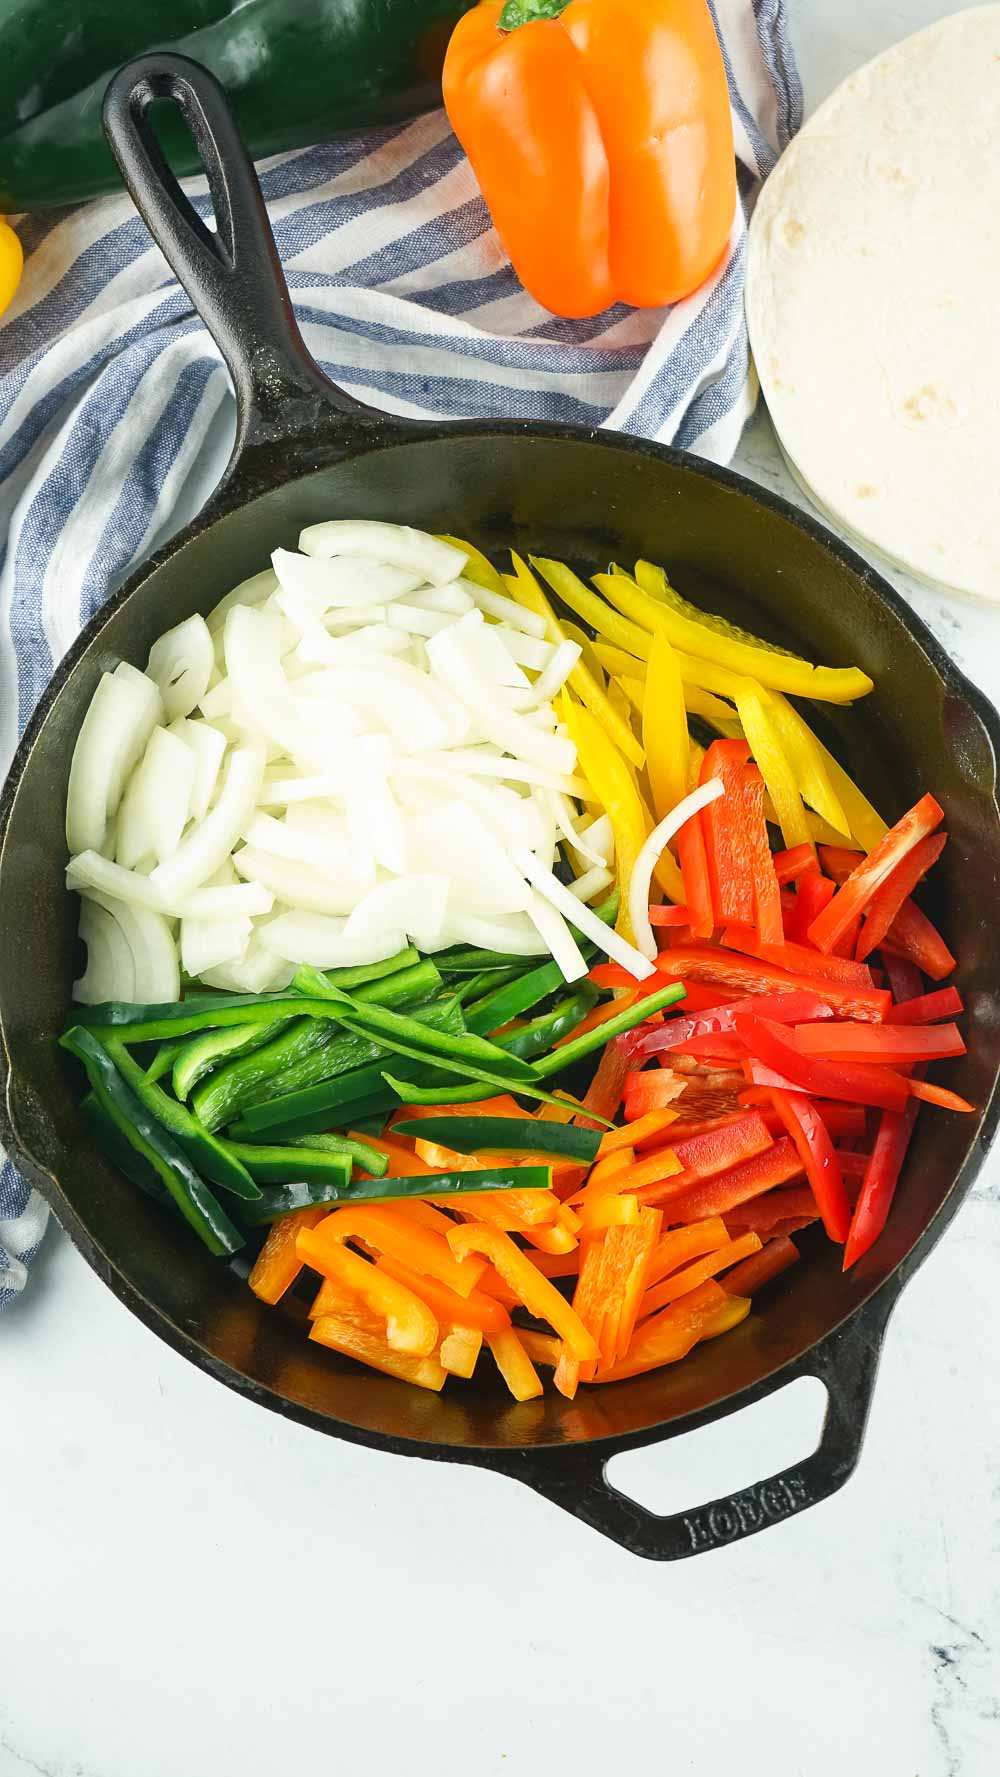 Looking for a quick 30-minute meal? This easy skillet chicken fajitas make a perfect weeknight dinner that can be served in so many ways!